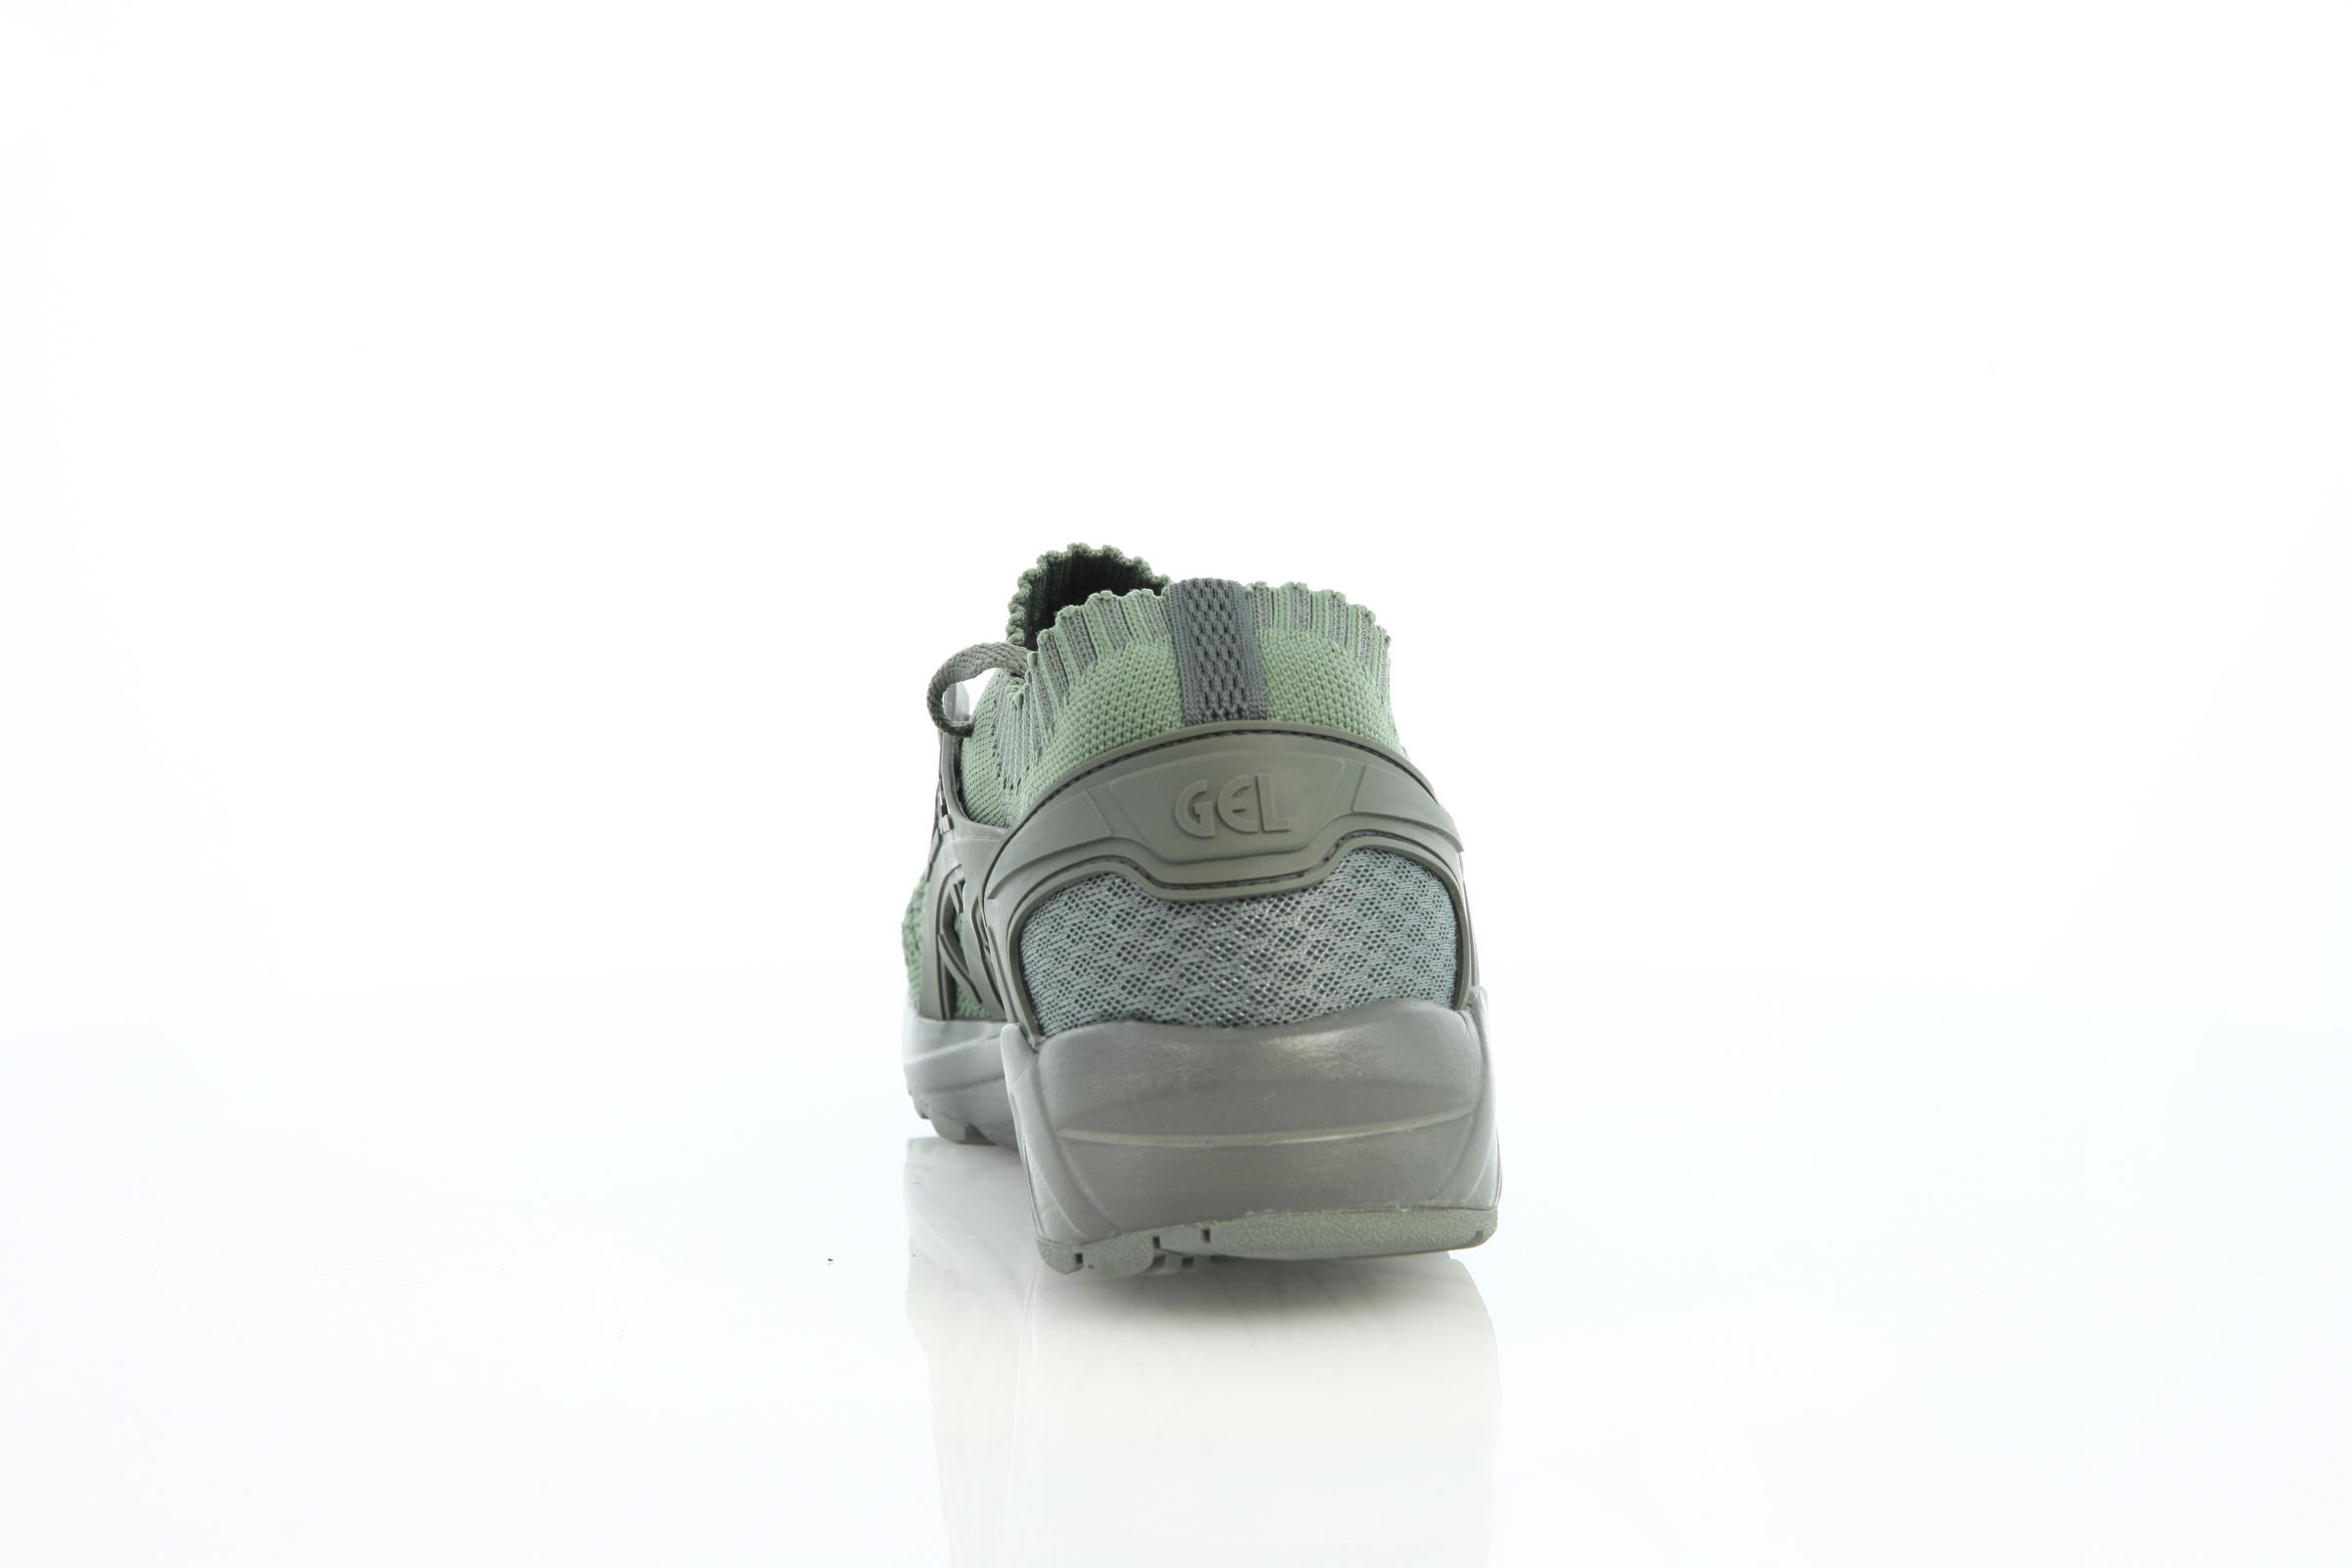 Asics Gel-Kayano Trainer One Piece Knit Pack "Agave Green"